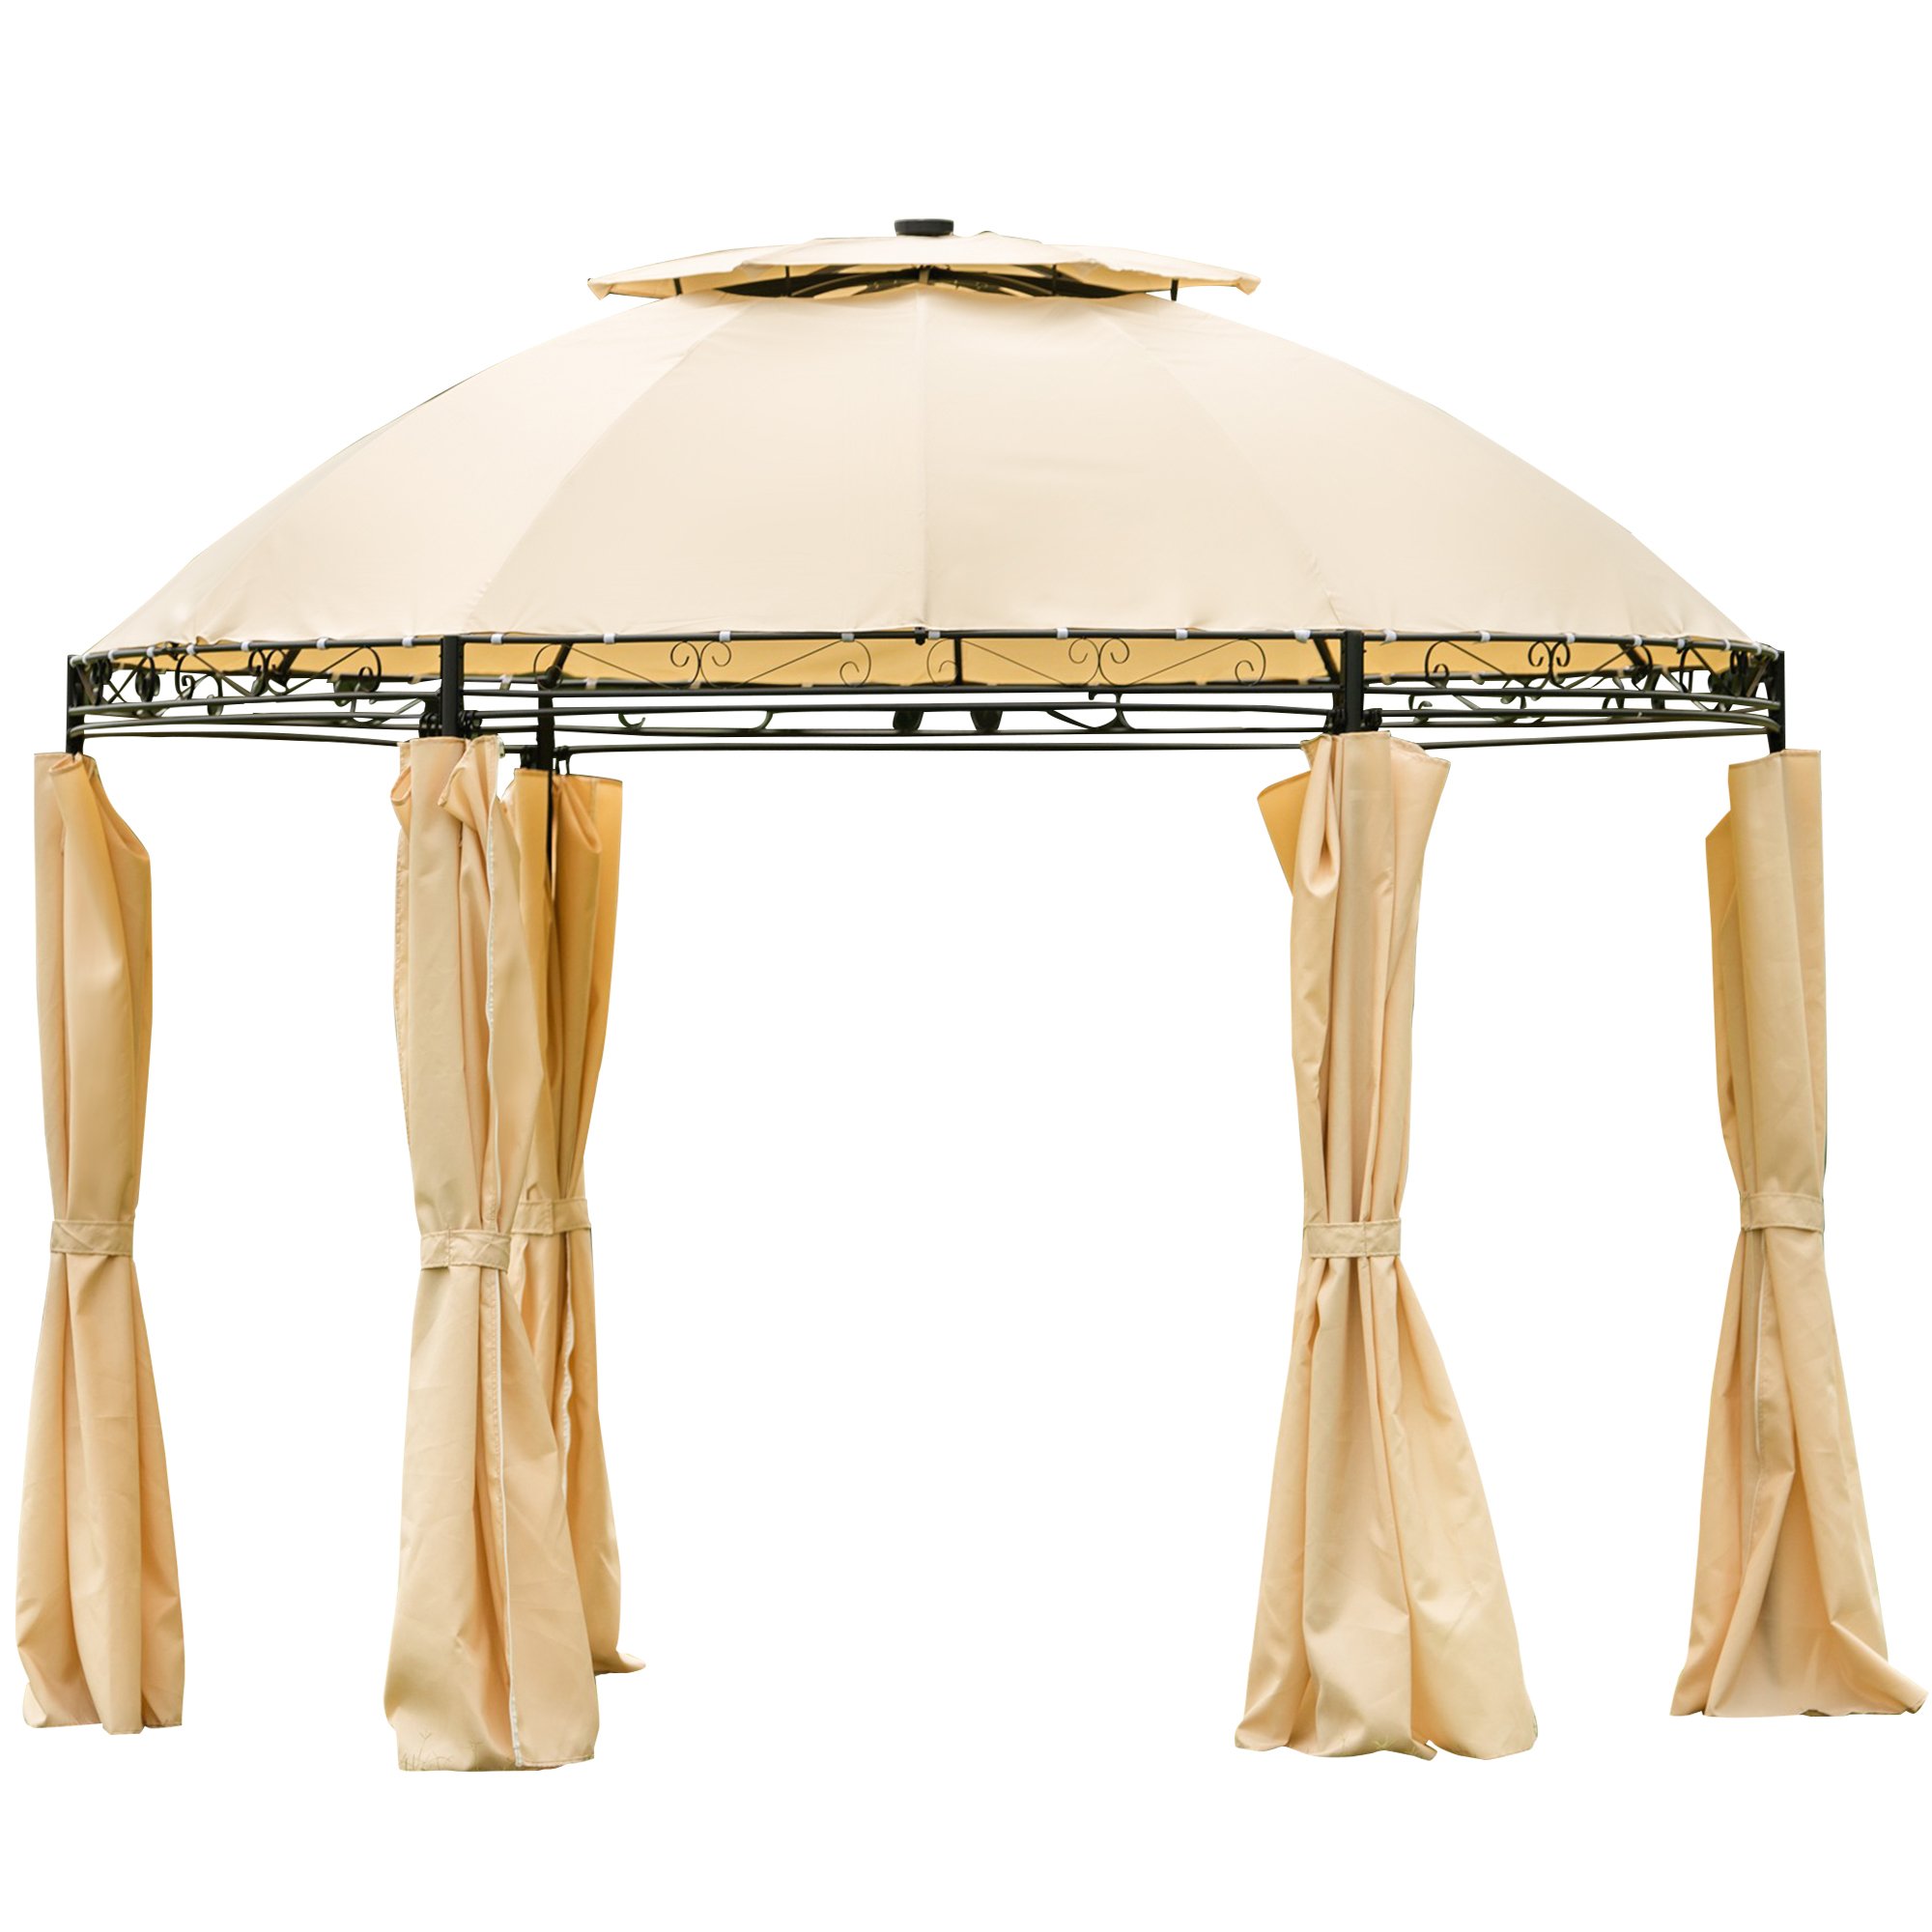 Outdoor Gazebo Steel Fabric Round Soft Top Gazebo，Outdoor Patio Dome Gazebo with Removable Curtains-CASAINC